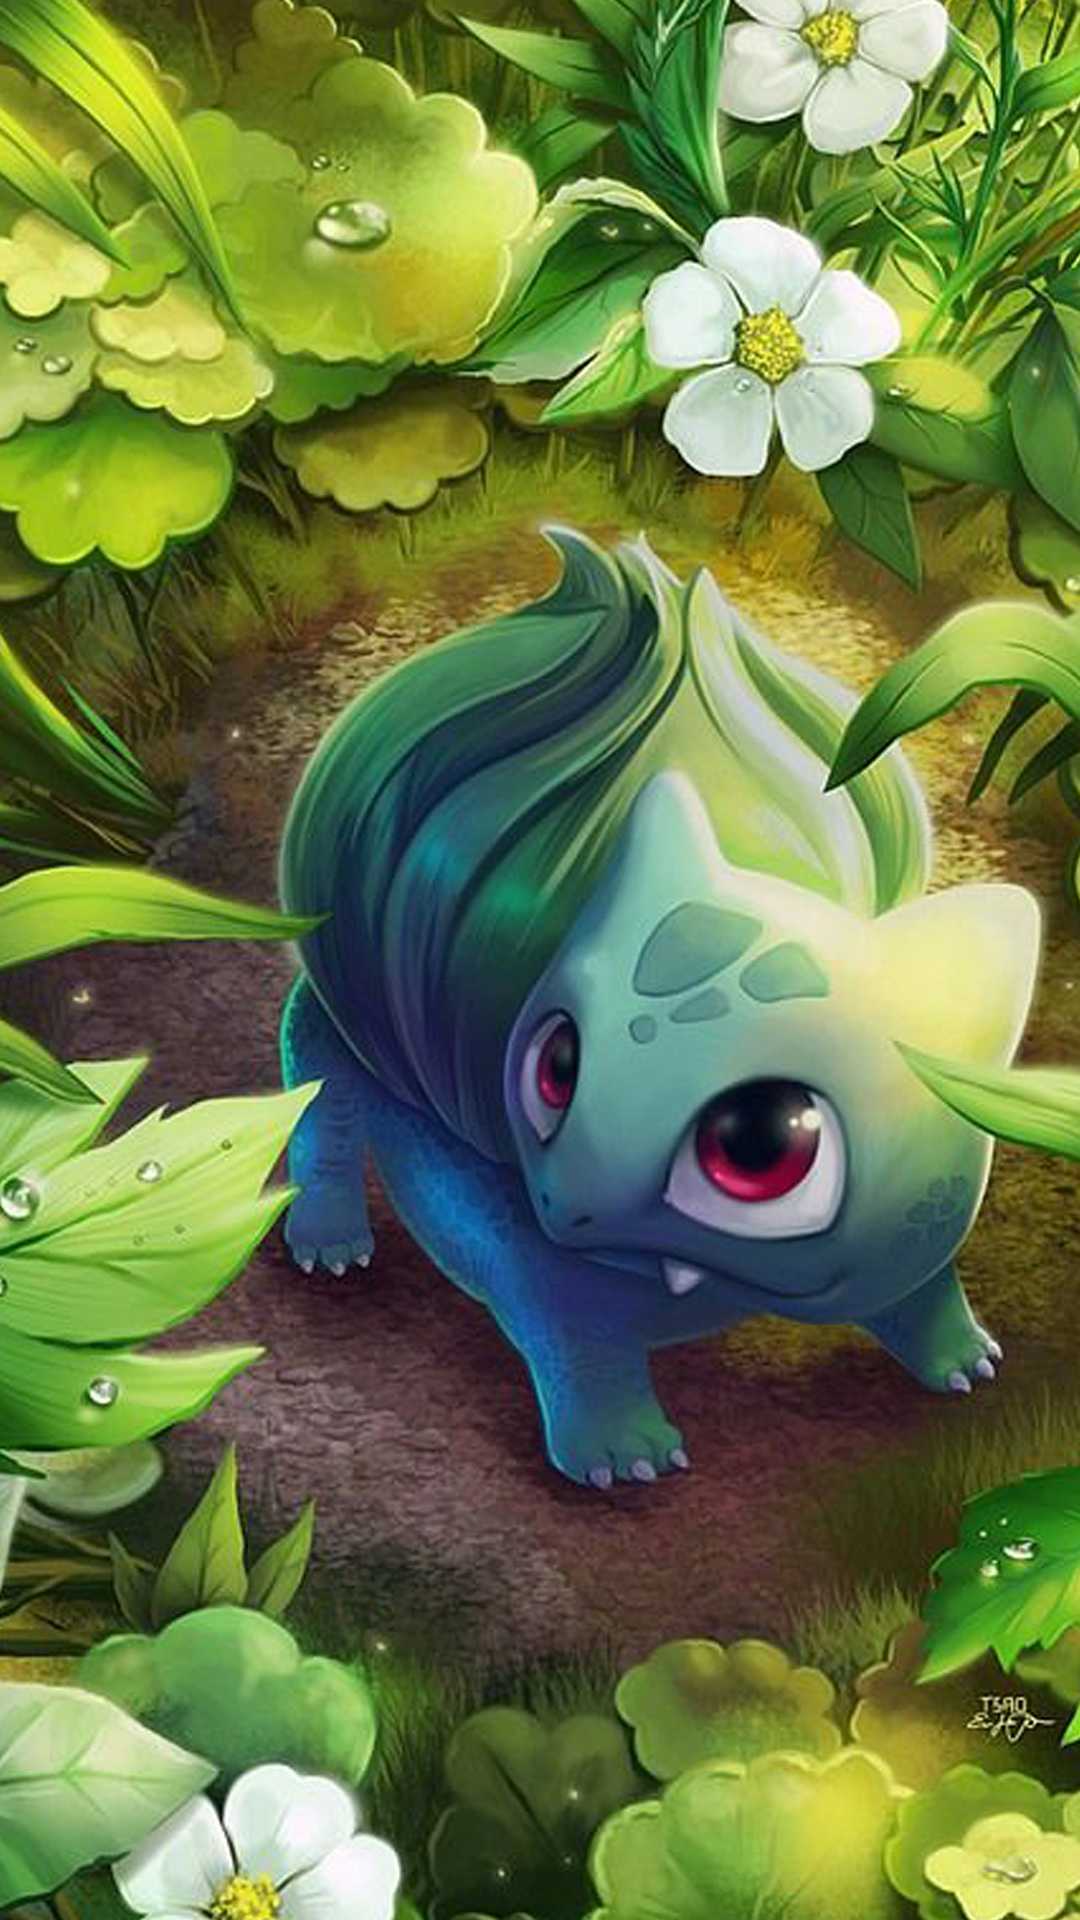 Full Hd Of Pokemon Go For Mobile Phone All Wallpapers Phones Cute